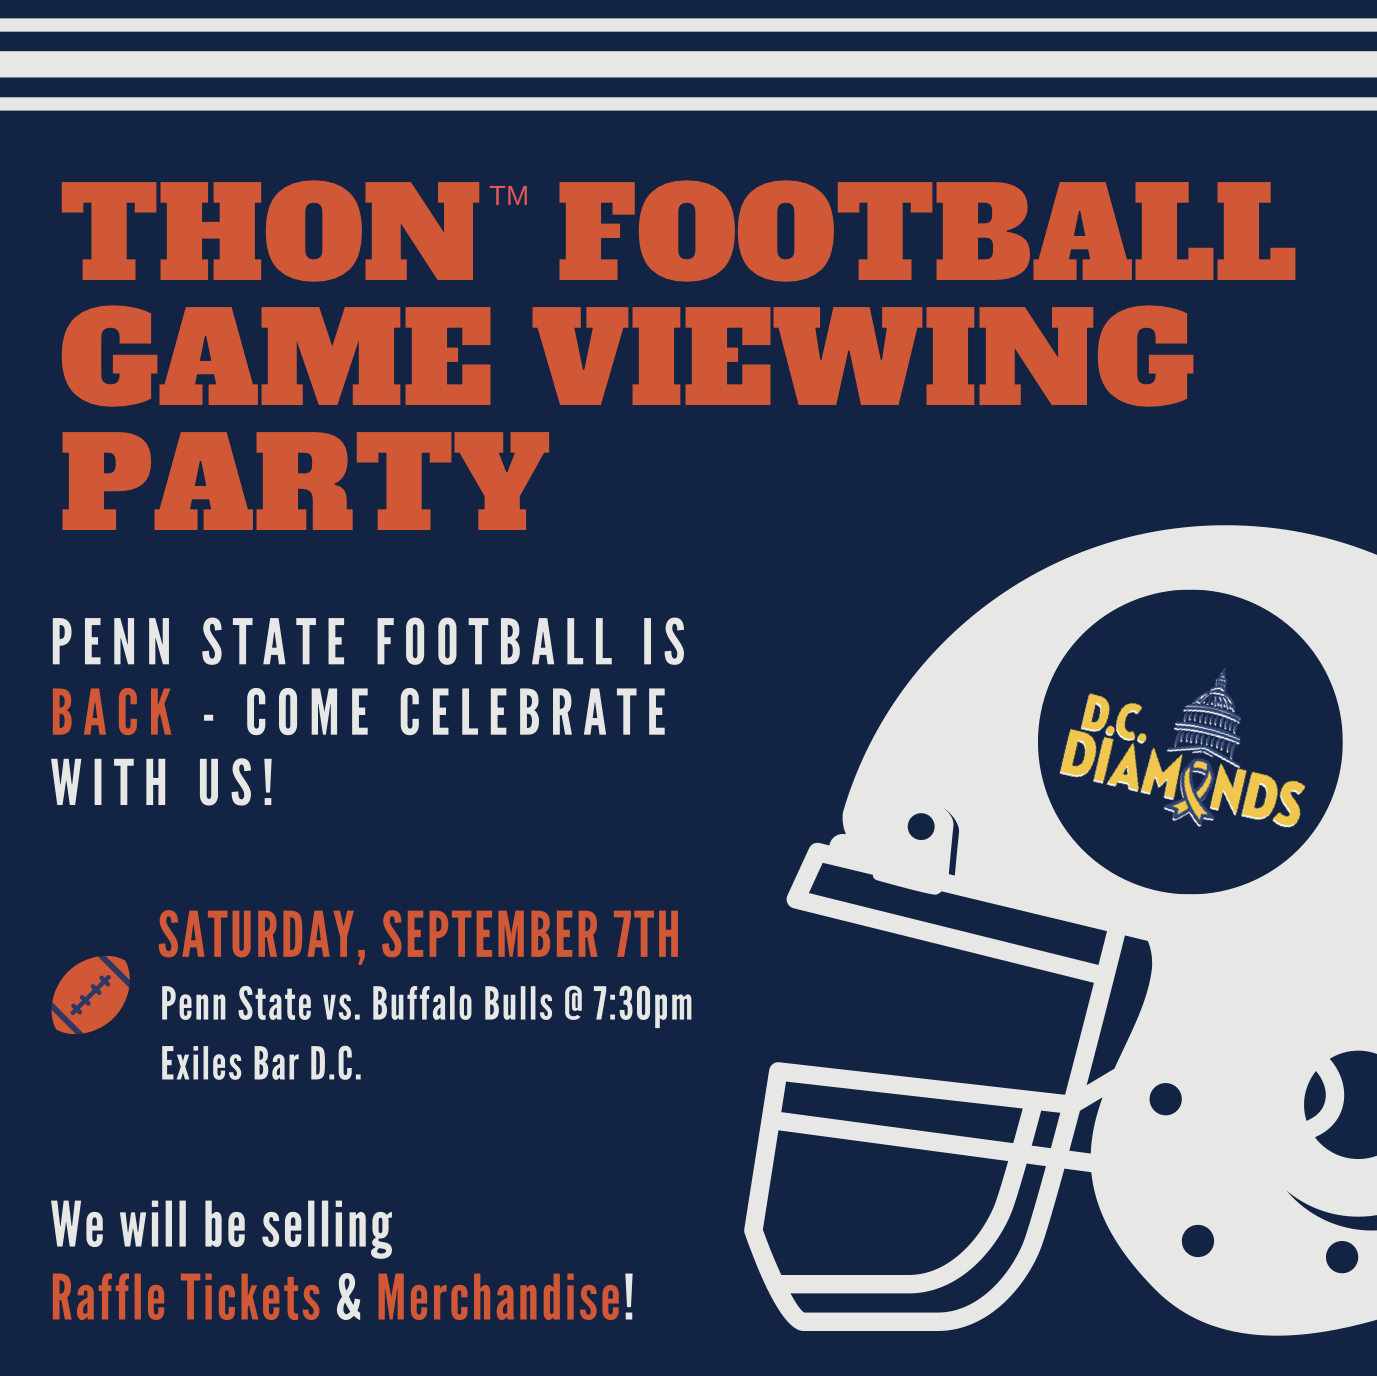 thon-football-game-viewing-party